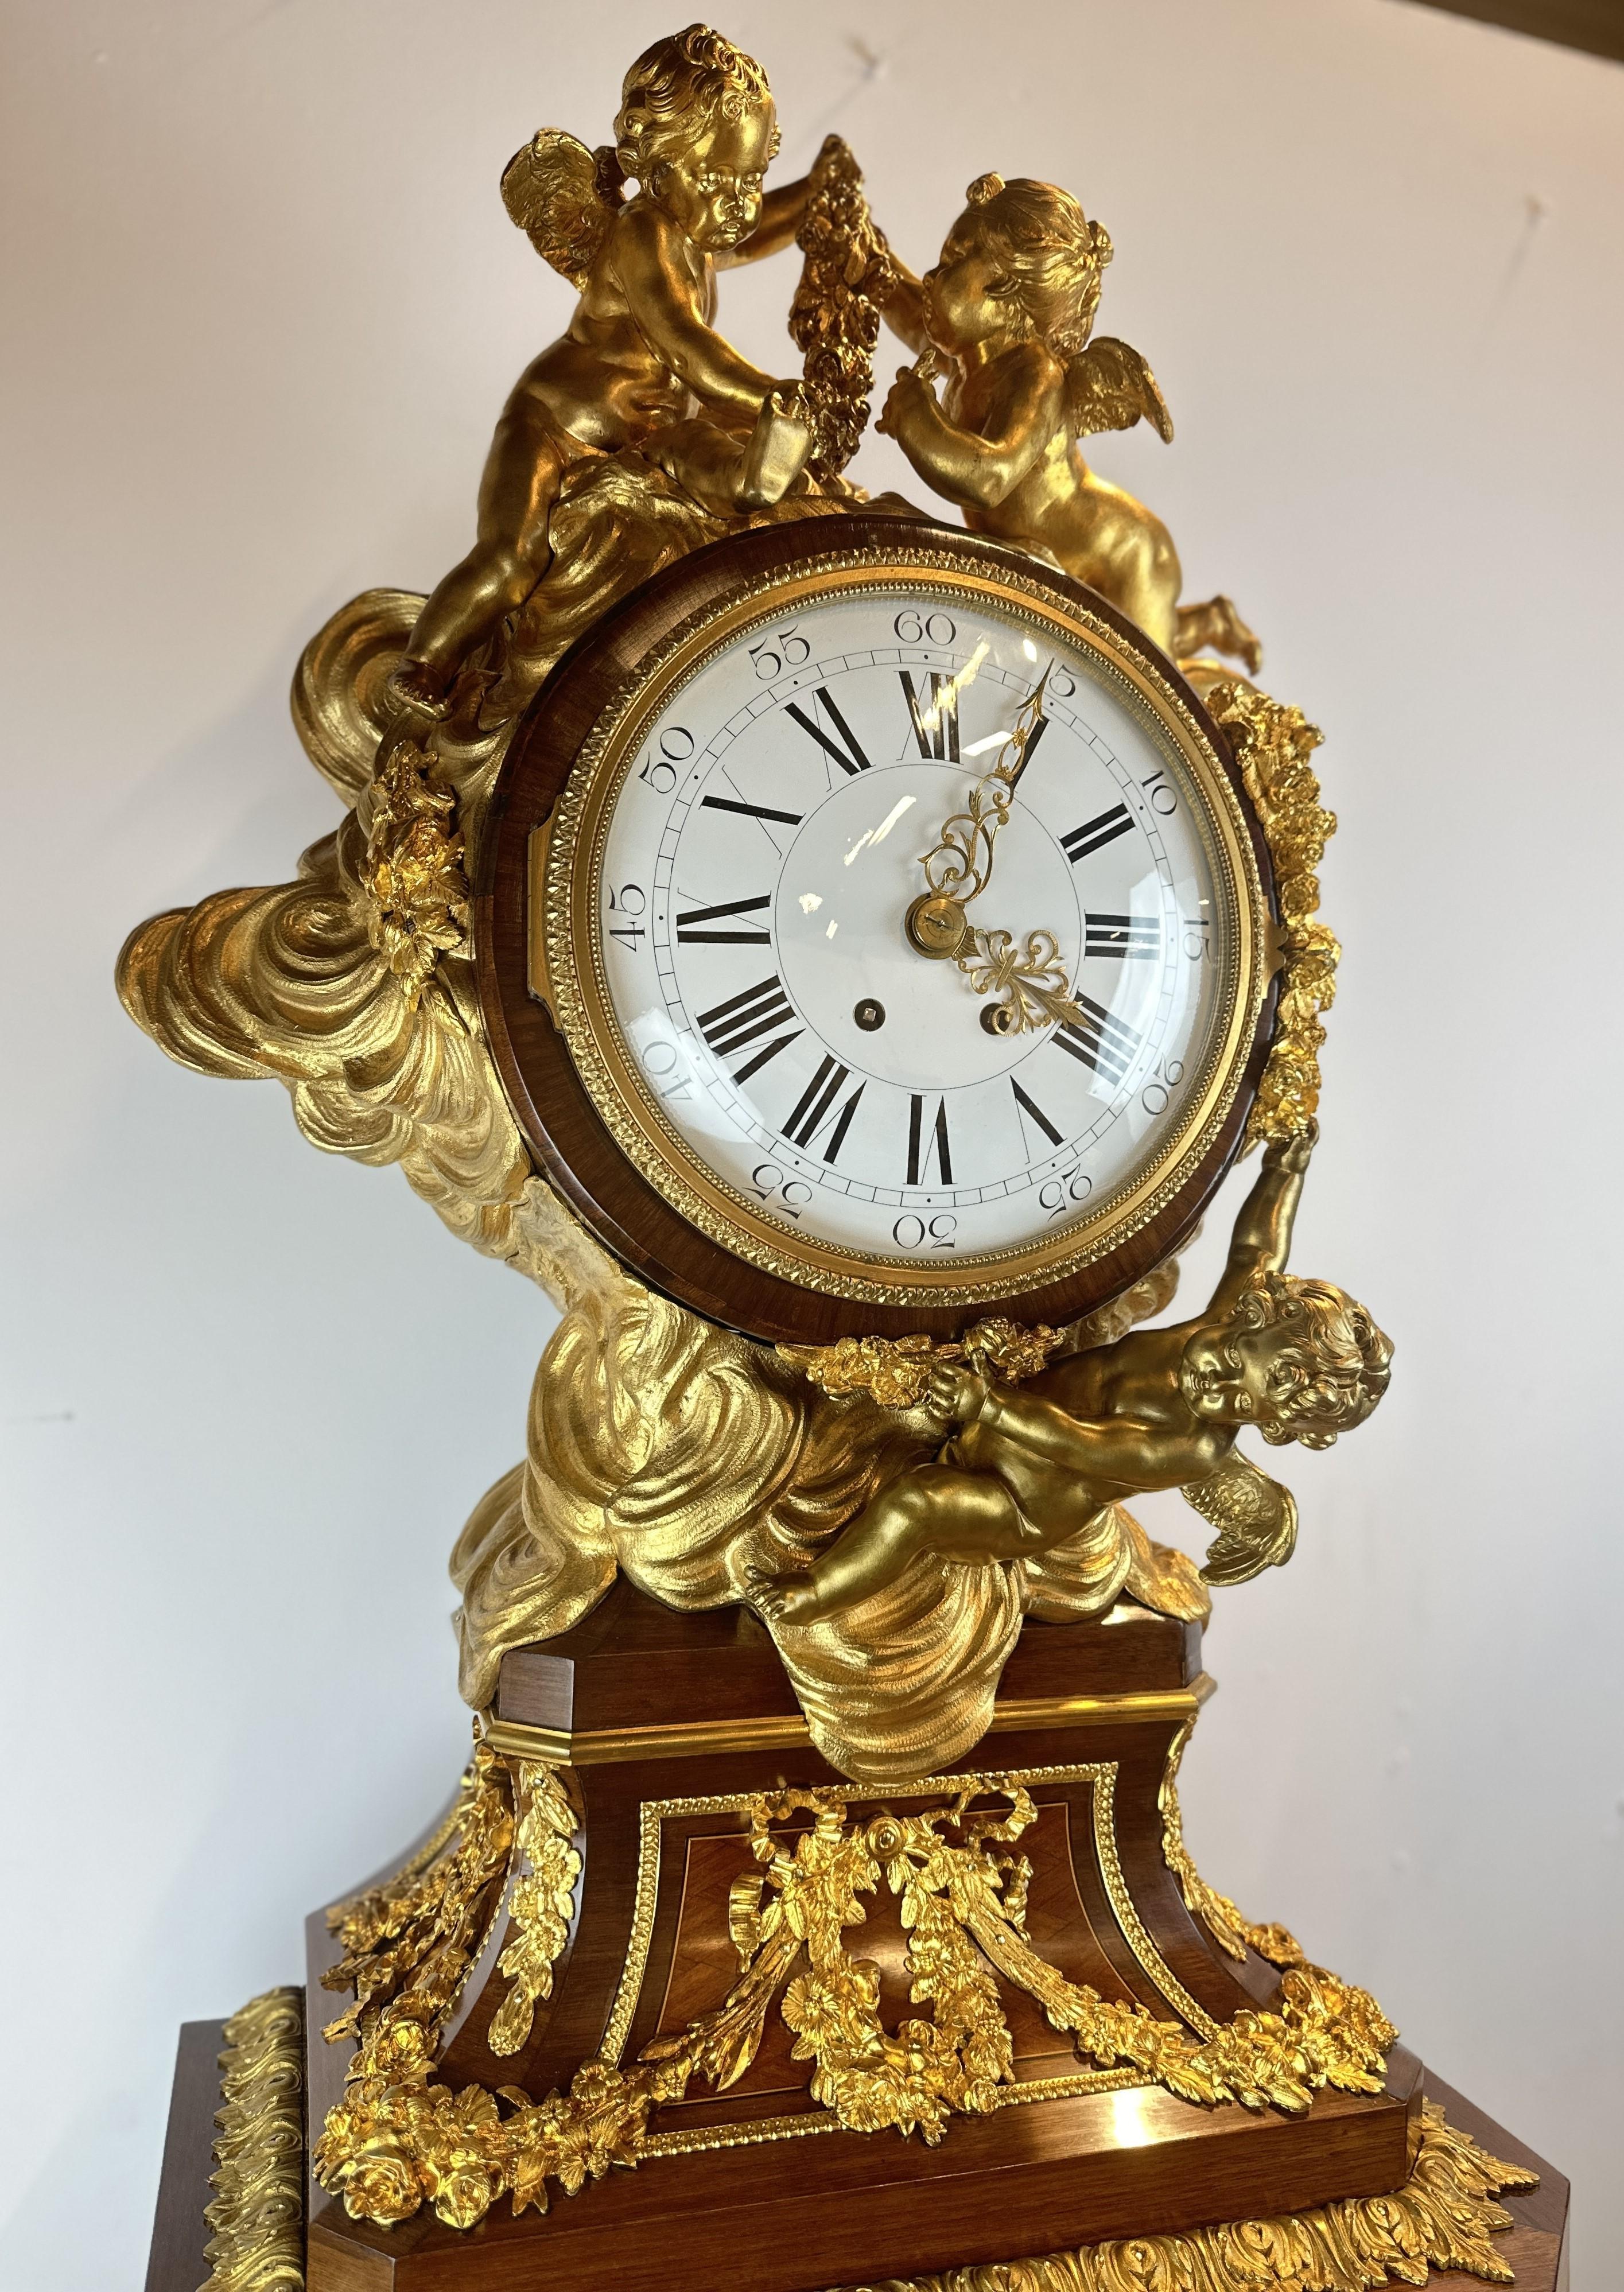 Spectacular mahogany grandfather clock, decorated with numerous high quality gilded bronze fittings. The dial is surrounded by superb gilded bronze frames representing three cherubs in the middle of the clouds. The pedestal case below the clock face